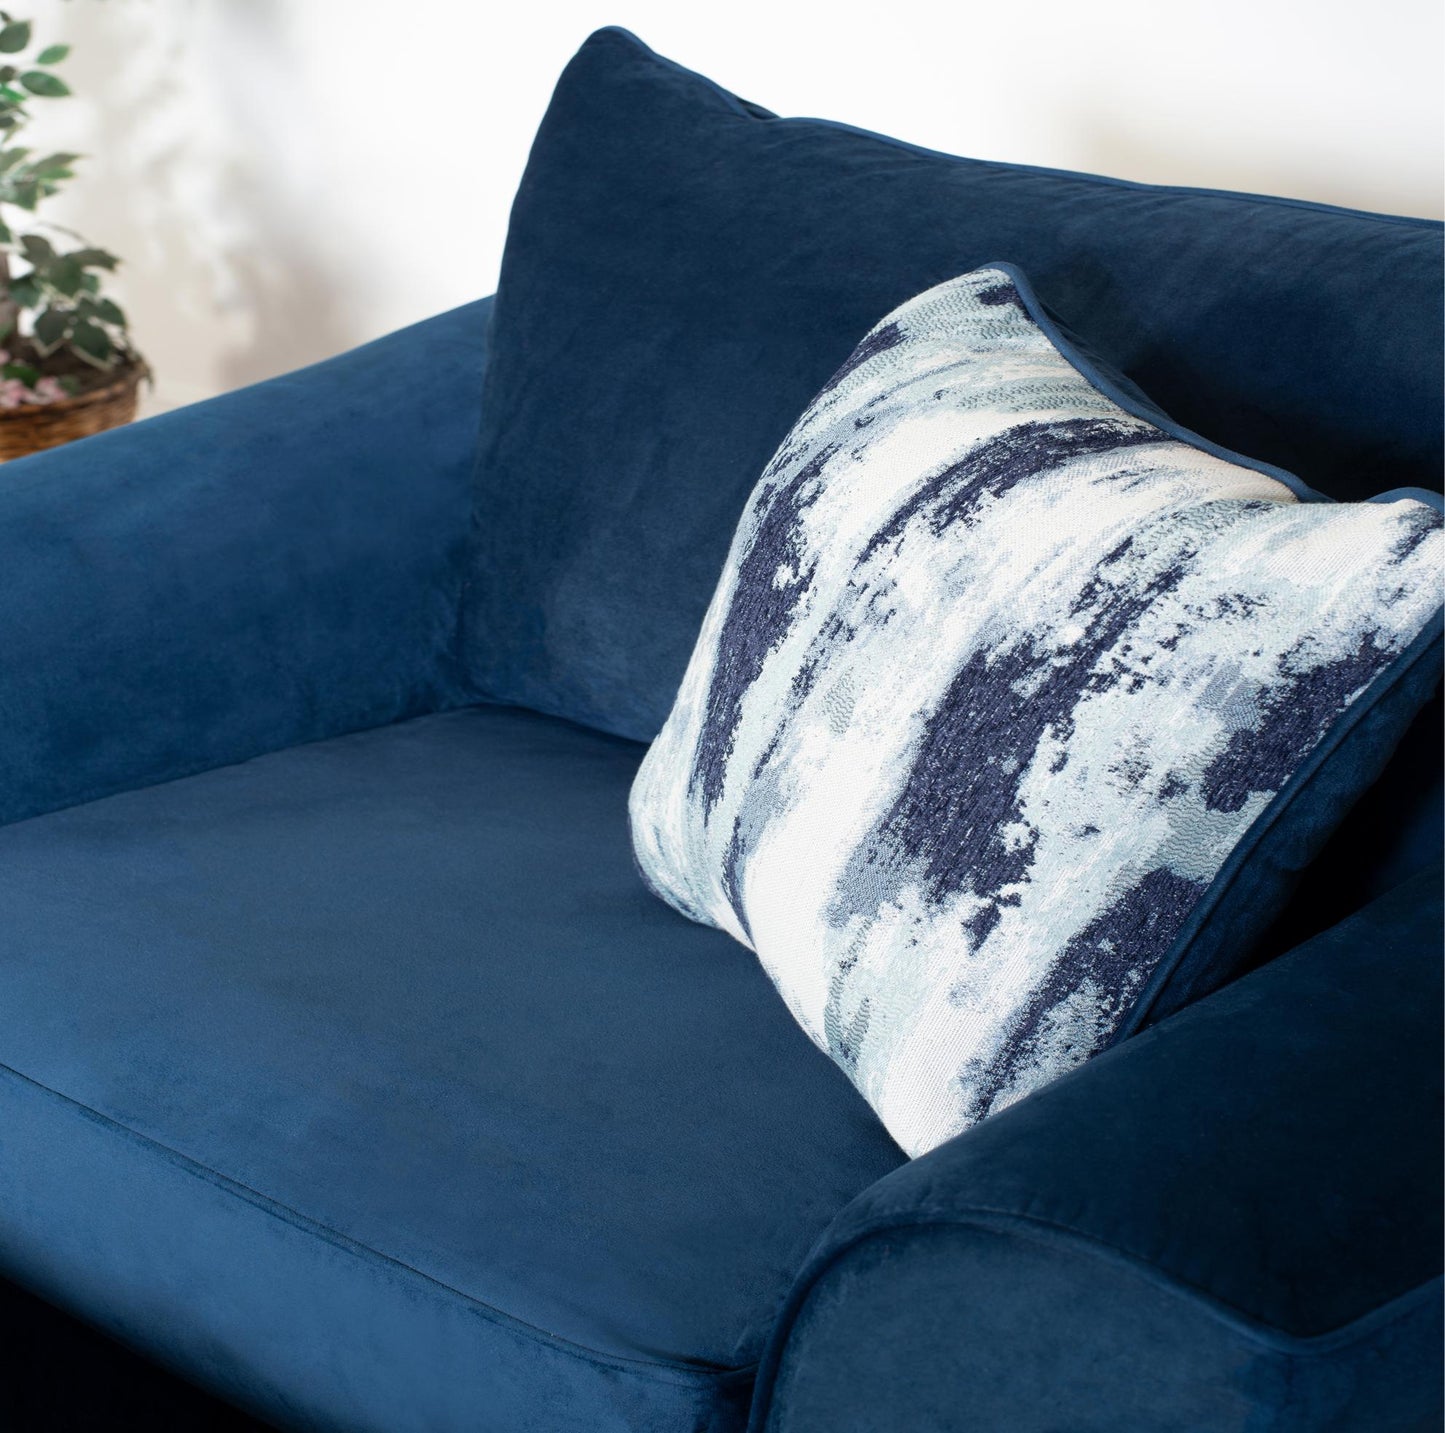 Camero Fabric Pillowback Chair with Ottoman Set in Navy Blue